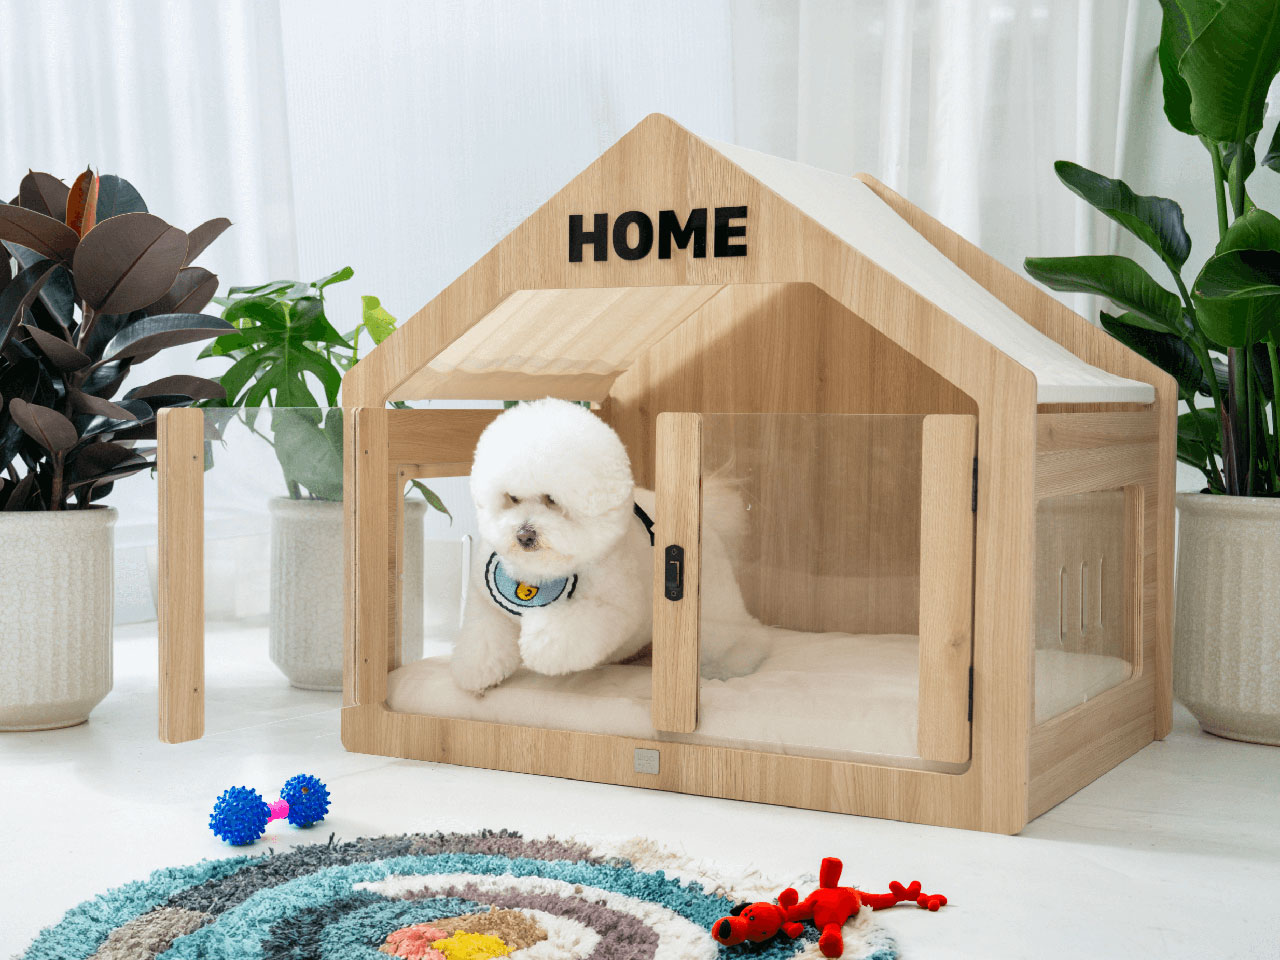 Say Goodbye to Wire Crates With the Chic Wooffy Dog House